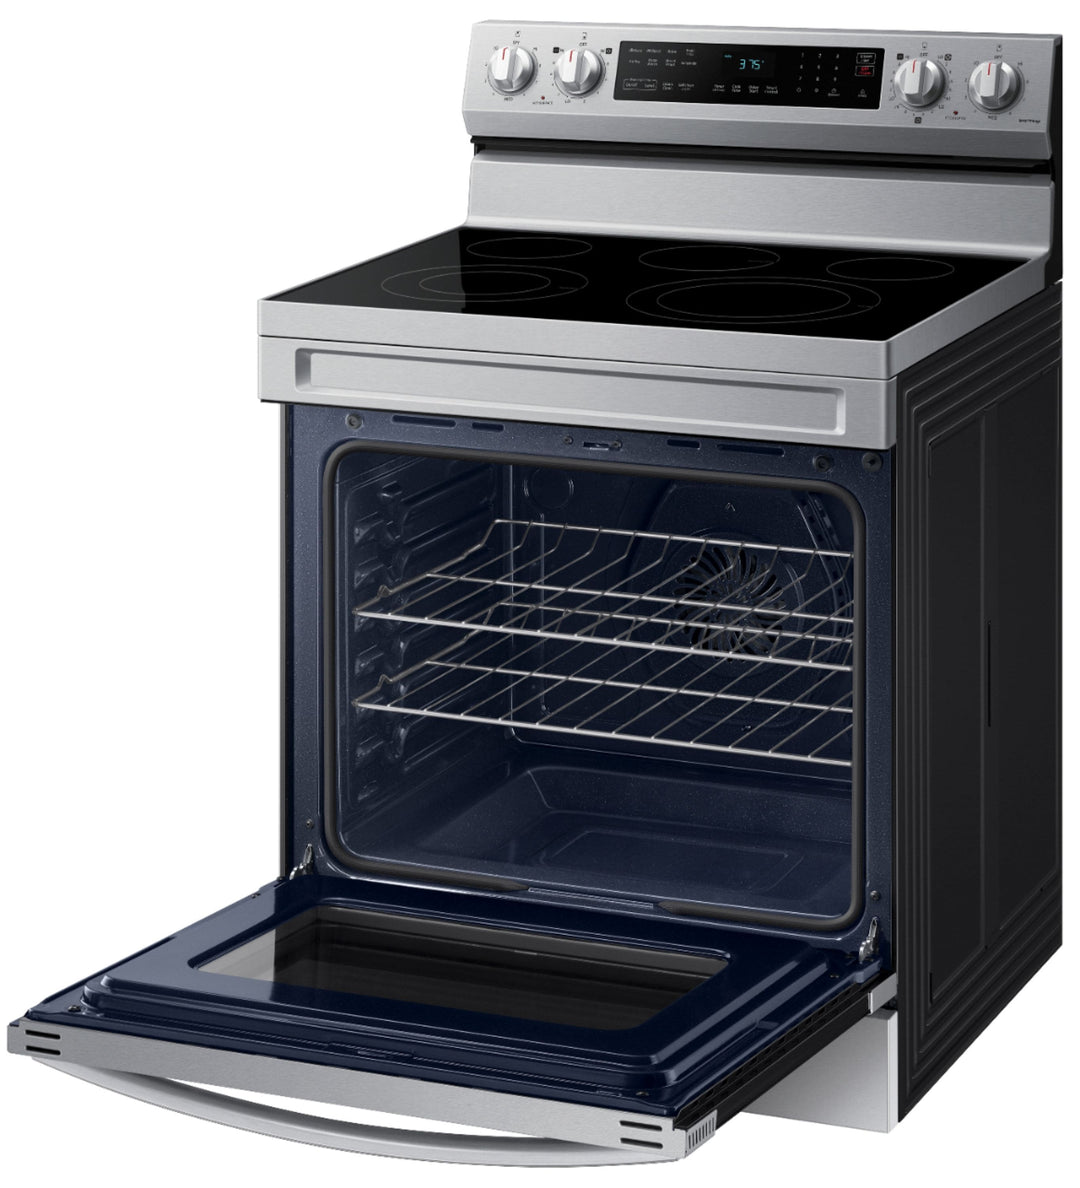 Samsung - 6.3 cu. ft. Freestanding Electric Range with WiFi, No-Preheat Air Fry & Convection - Stainless steel_2